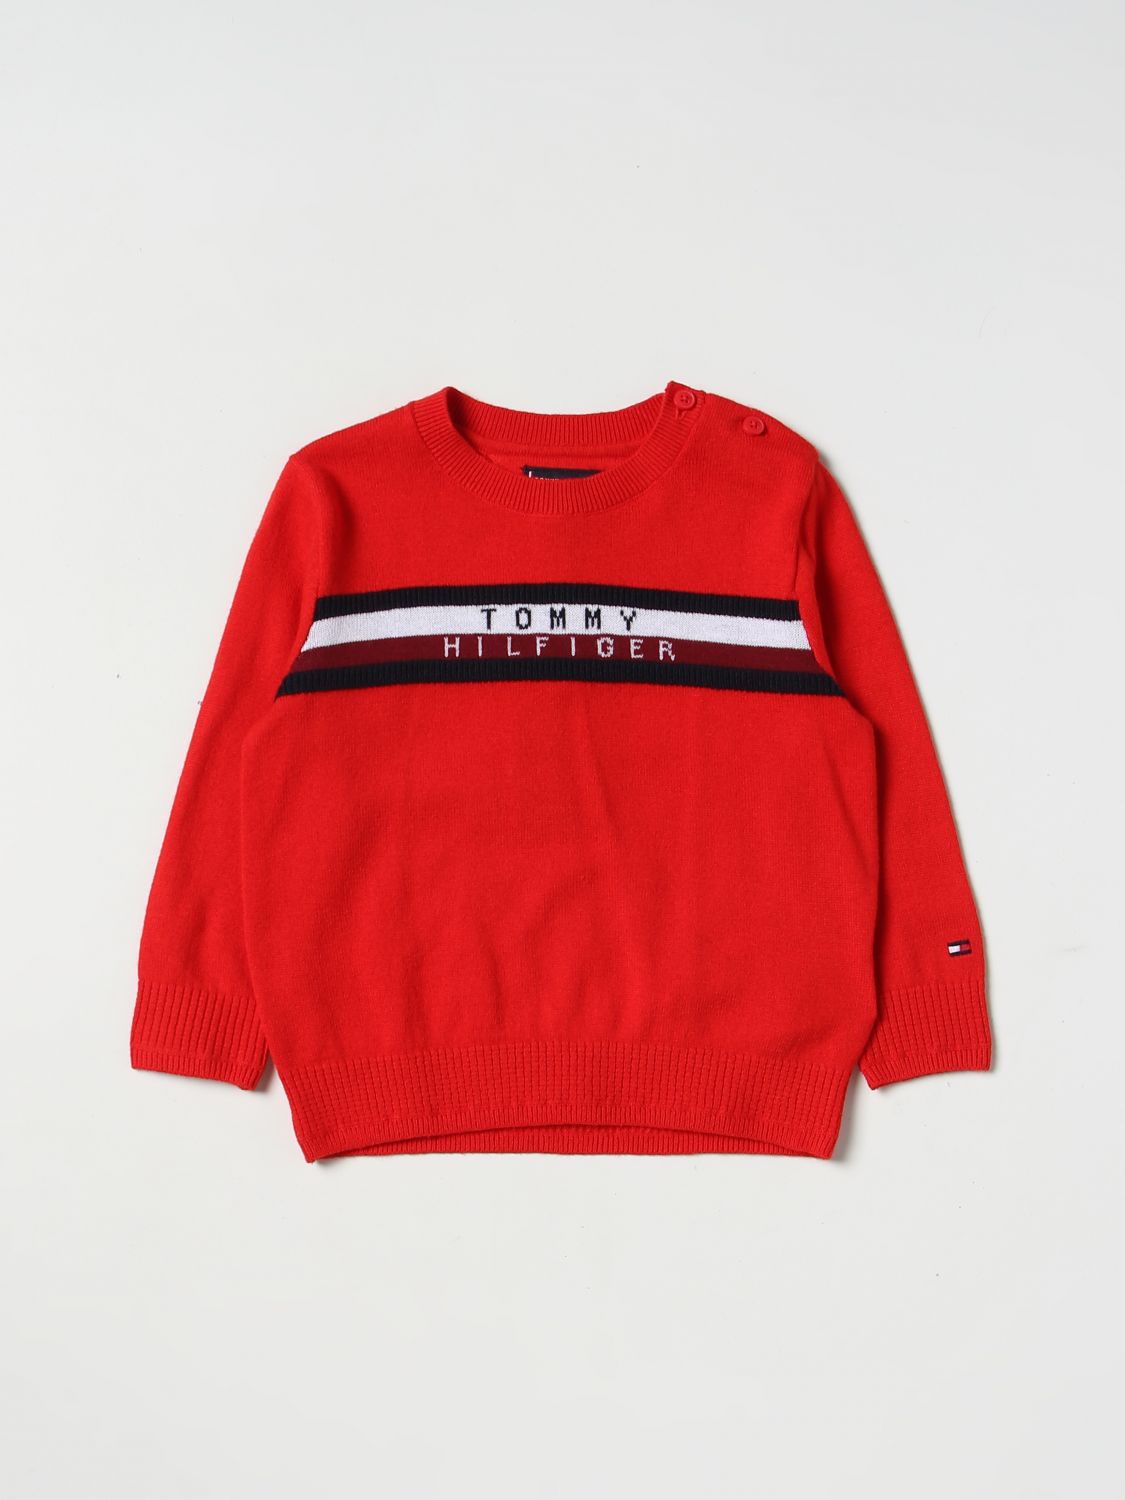 TOMMY HILFIGER: sweater for baby - Red | Tommy Hilfiger sweater ...